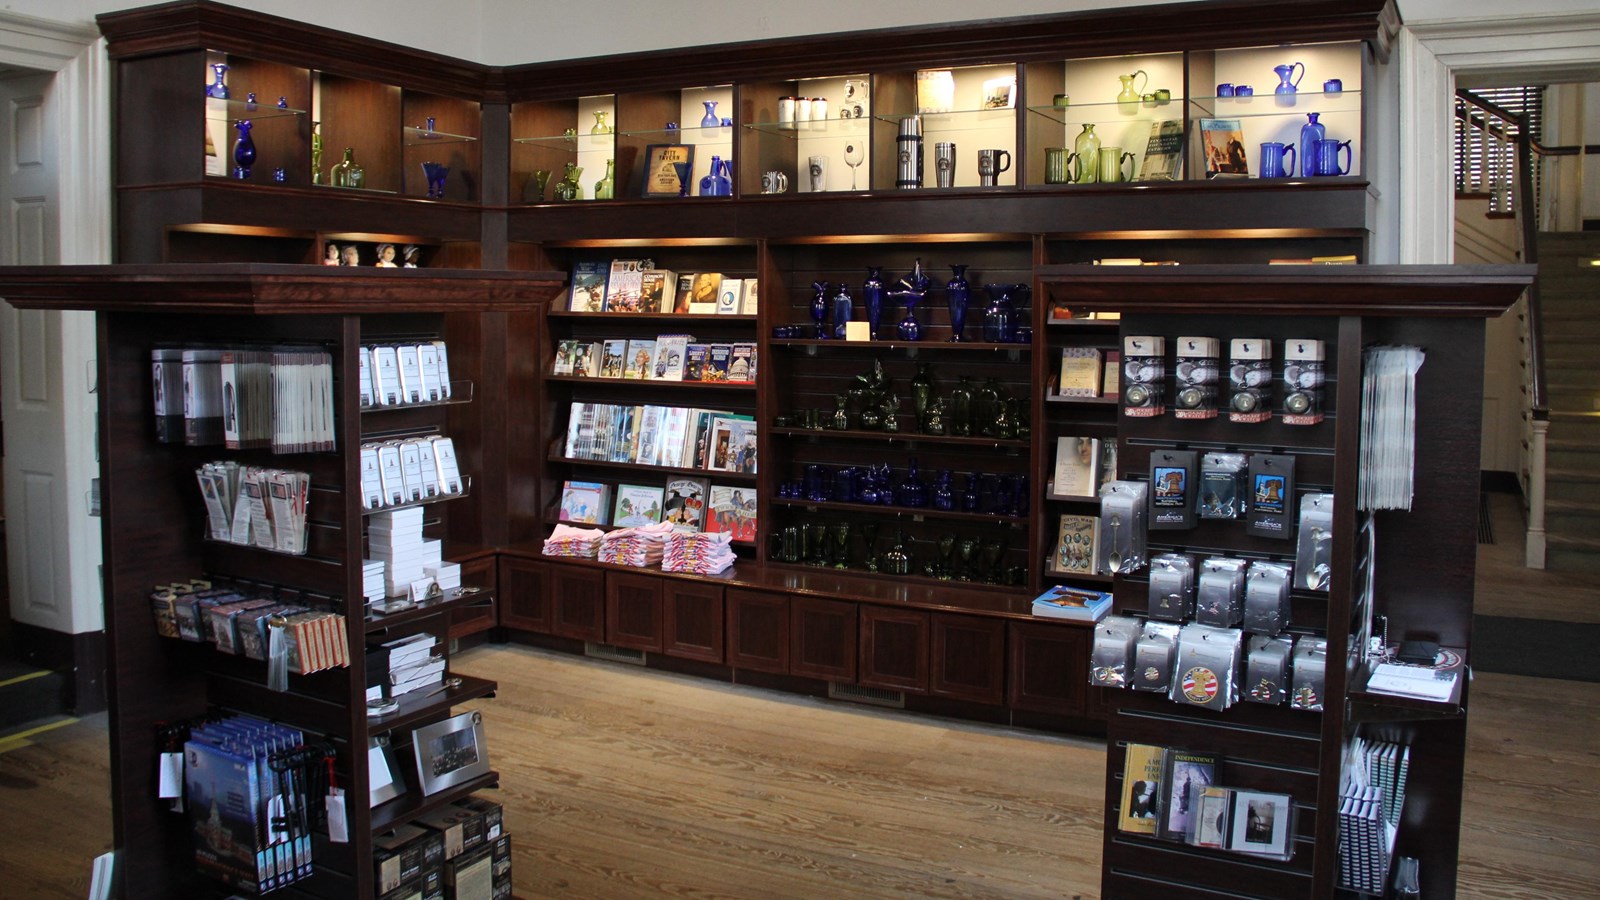 Dark colored wooden shelving units display a variety of books and souvenirs.